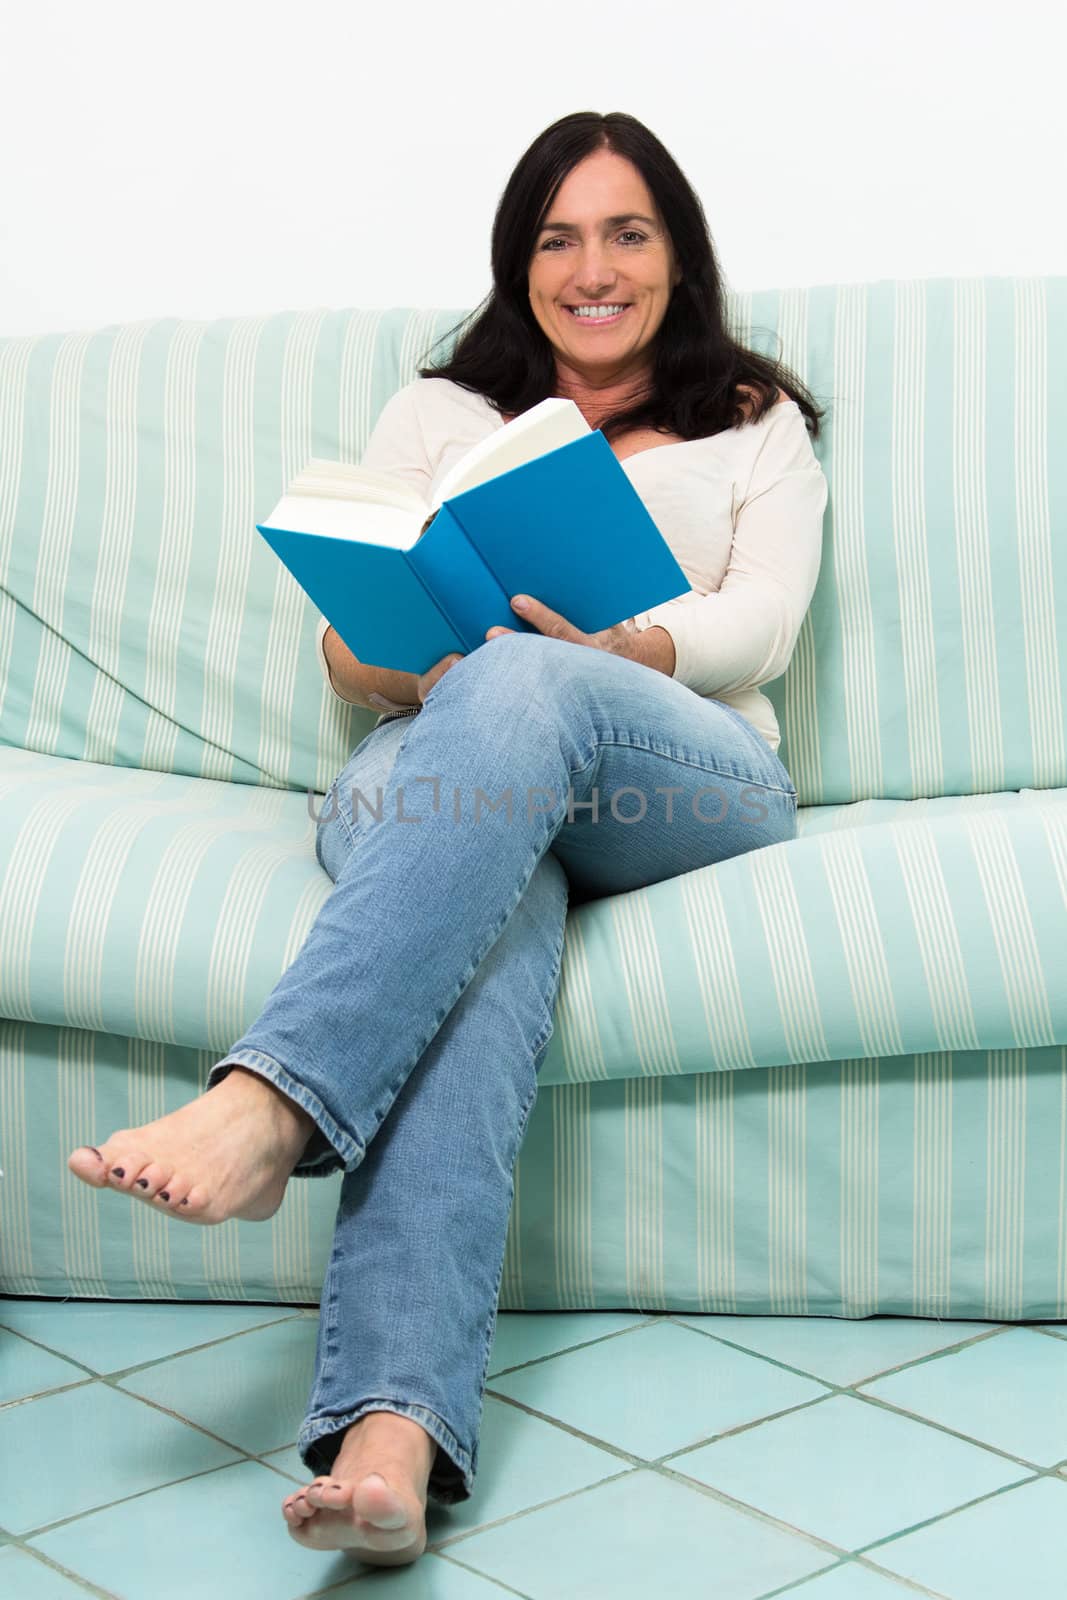 Dark haired woman lying on couch and reading a book by dwaschnig_photo